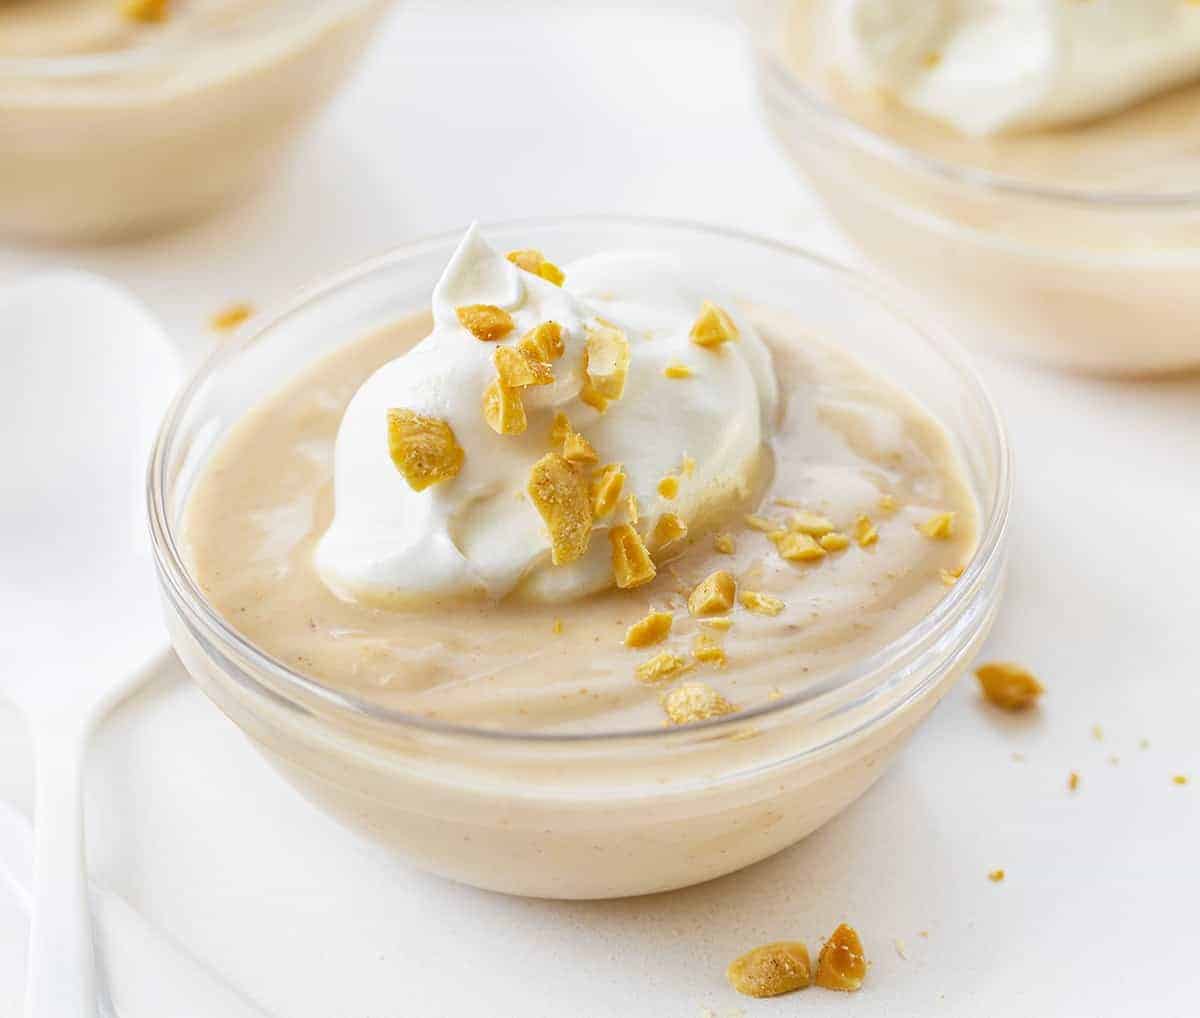 Homemade Peanut Butter Pudding with Whipped Topping and Peanuts